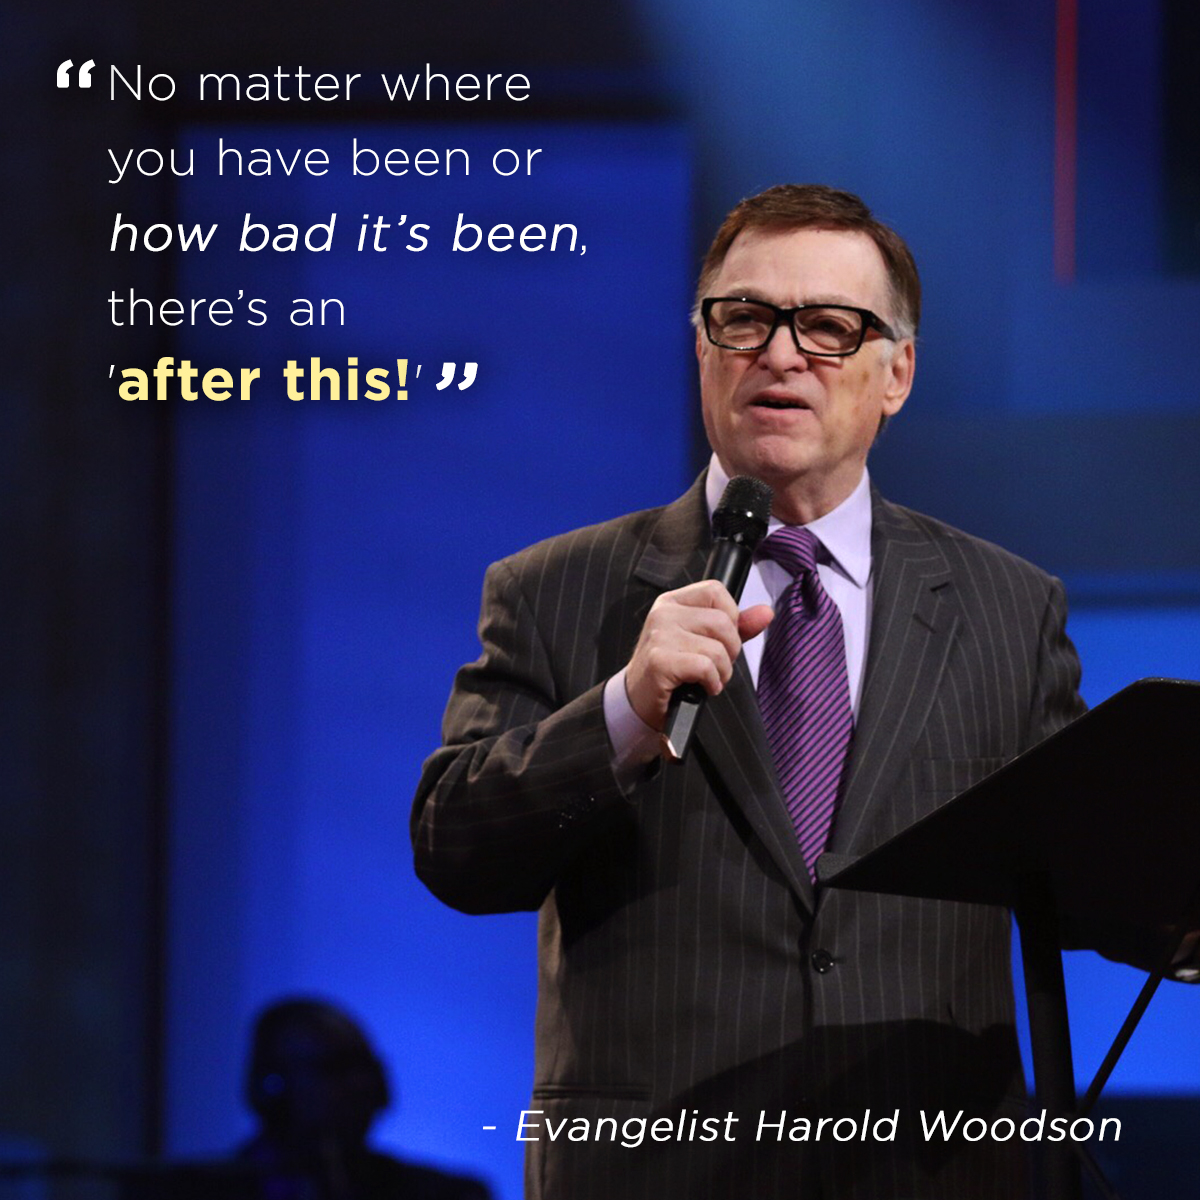 “No matter where you been or how bad it’s been, there’s an ’after this!’ ” – Evangelist Harold Woodson